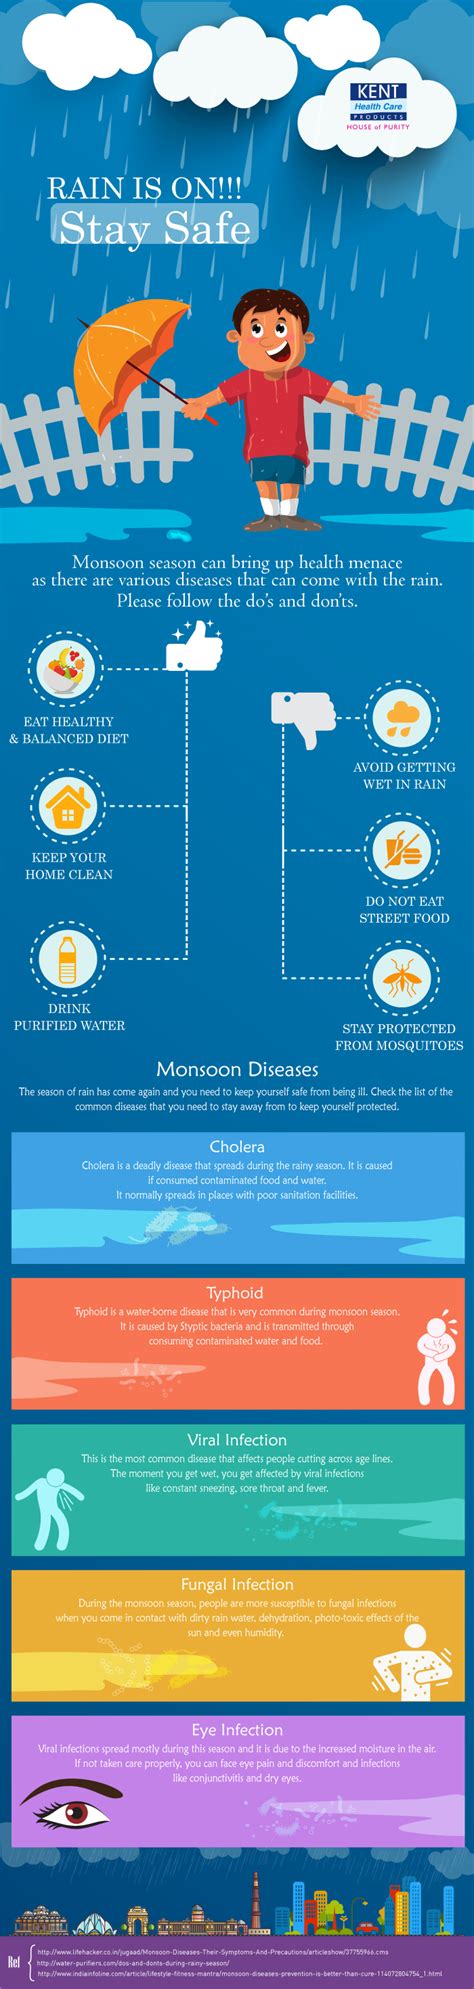 Stay Protected From Waterborne Diseases This Monsoon